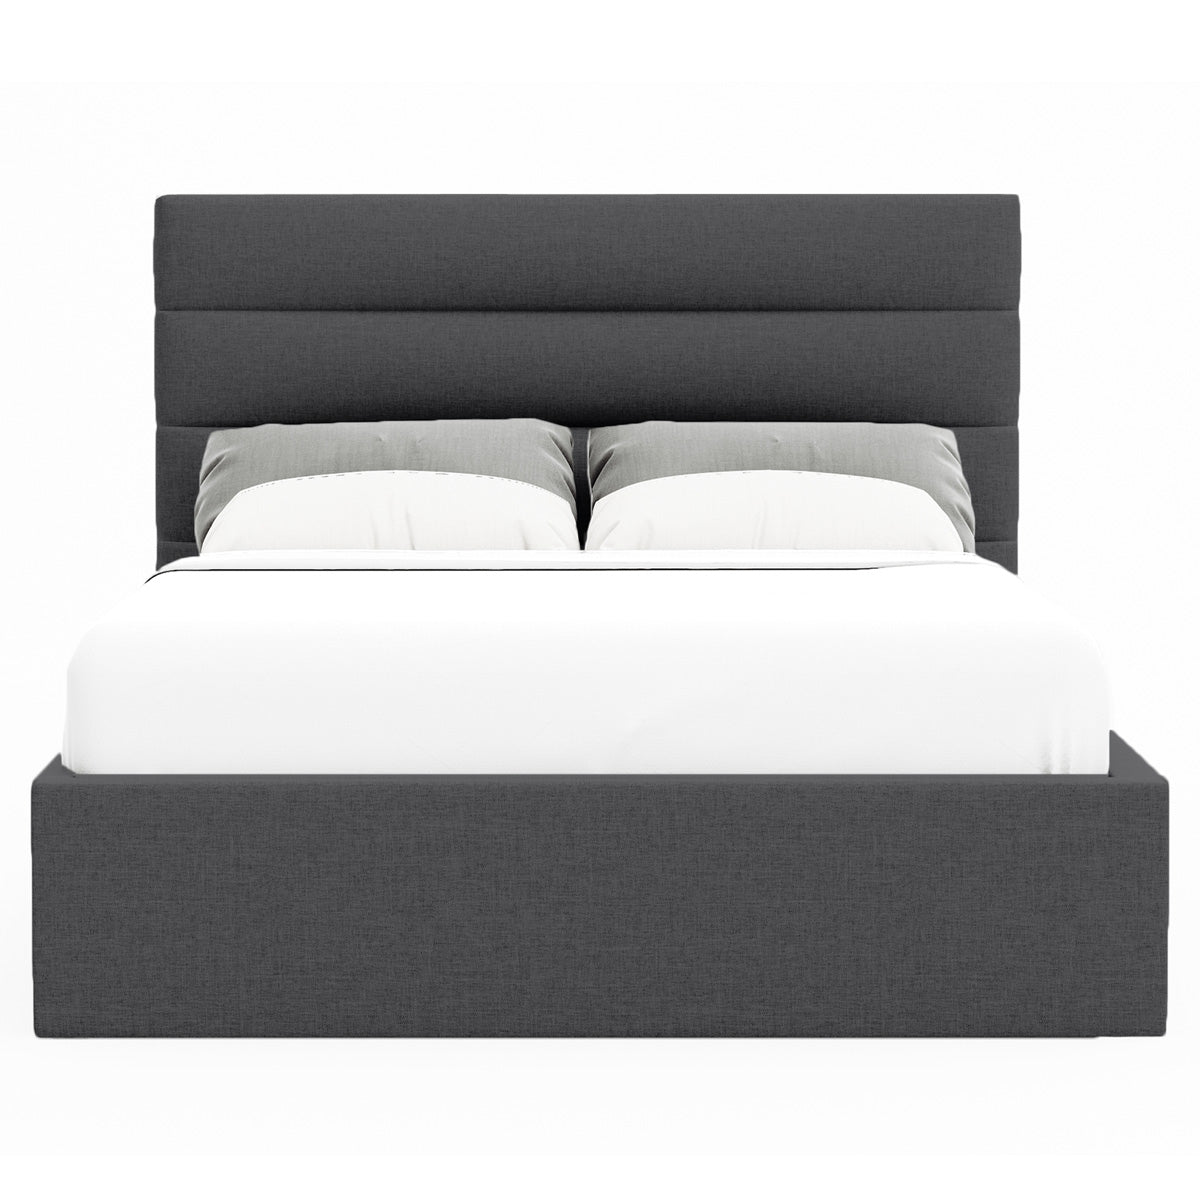 Benny Gas Lift Storage Bed Frame (Charcoal Fabric)